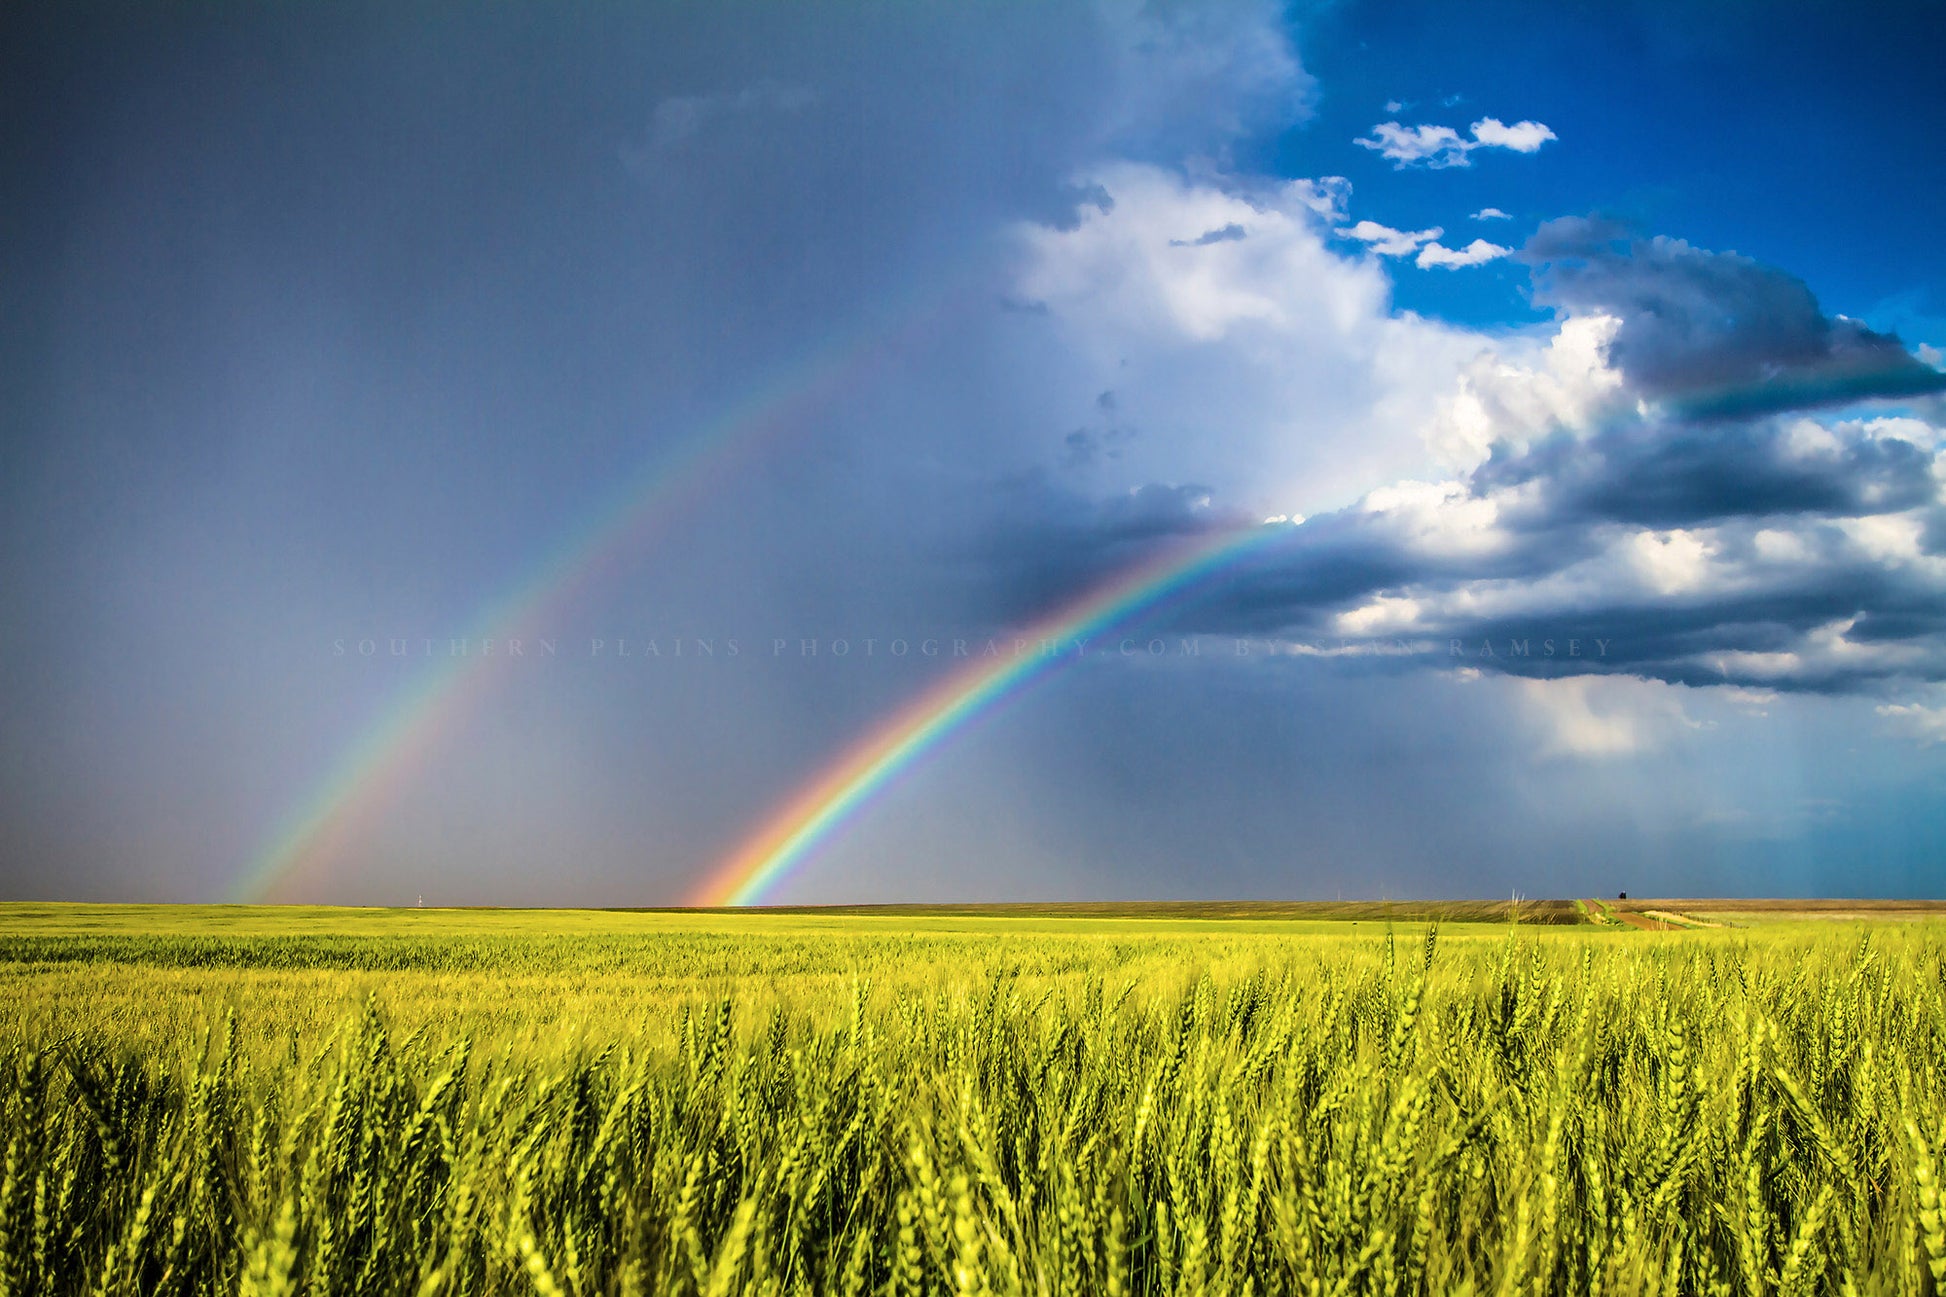 Country photography print of a double rainbow over a wheat field after a stormy spring day in Kansas by Sean Ramsey of Southern Plains Photography.